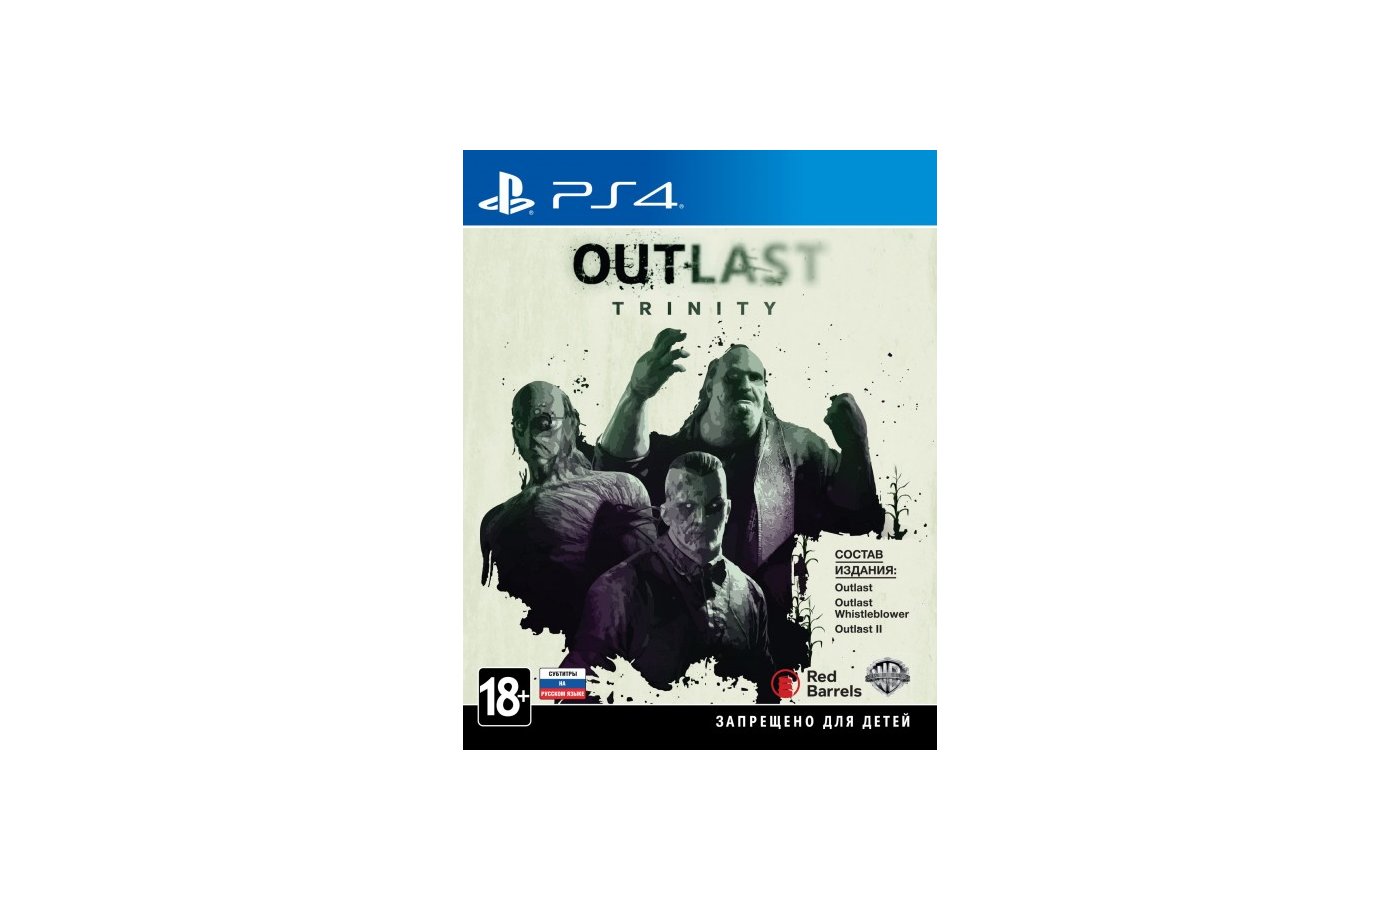 Trials ps4. Диск ПС 4 Outlast Trinity. Аутласт диск на пс4. Outlast Trinity Sony ps4. Аутласт 2 плейстейшен 4 диск.